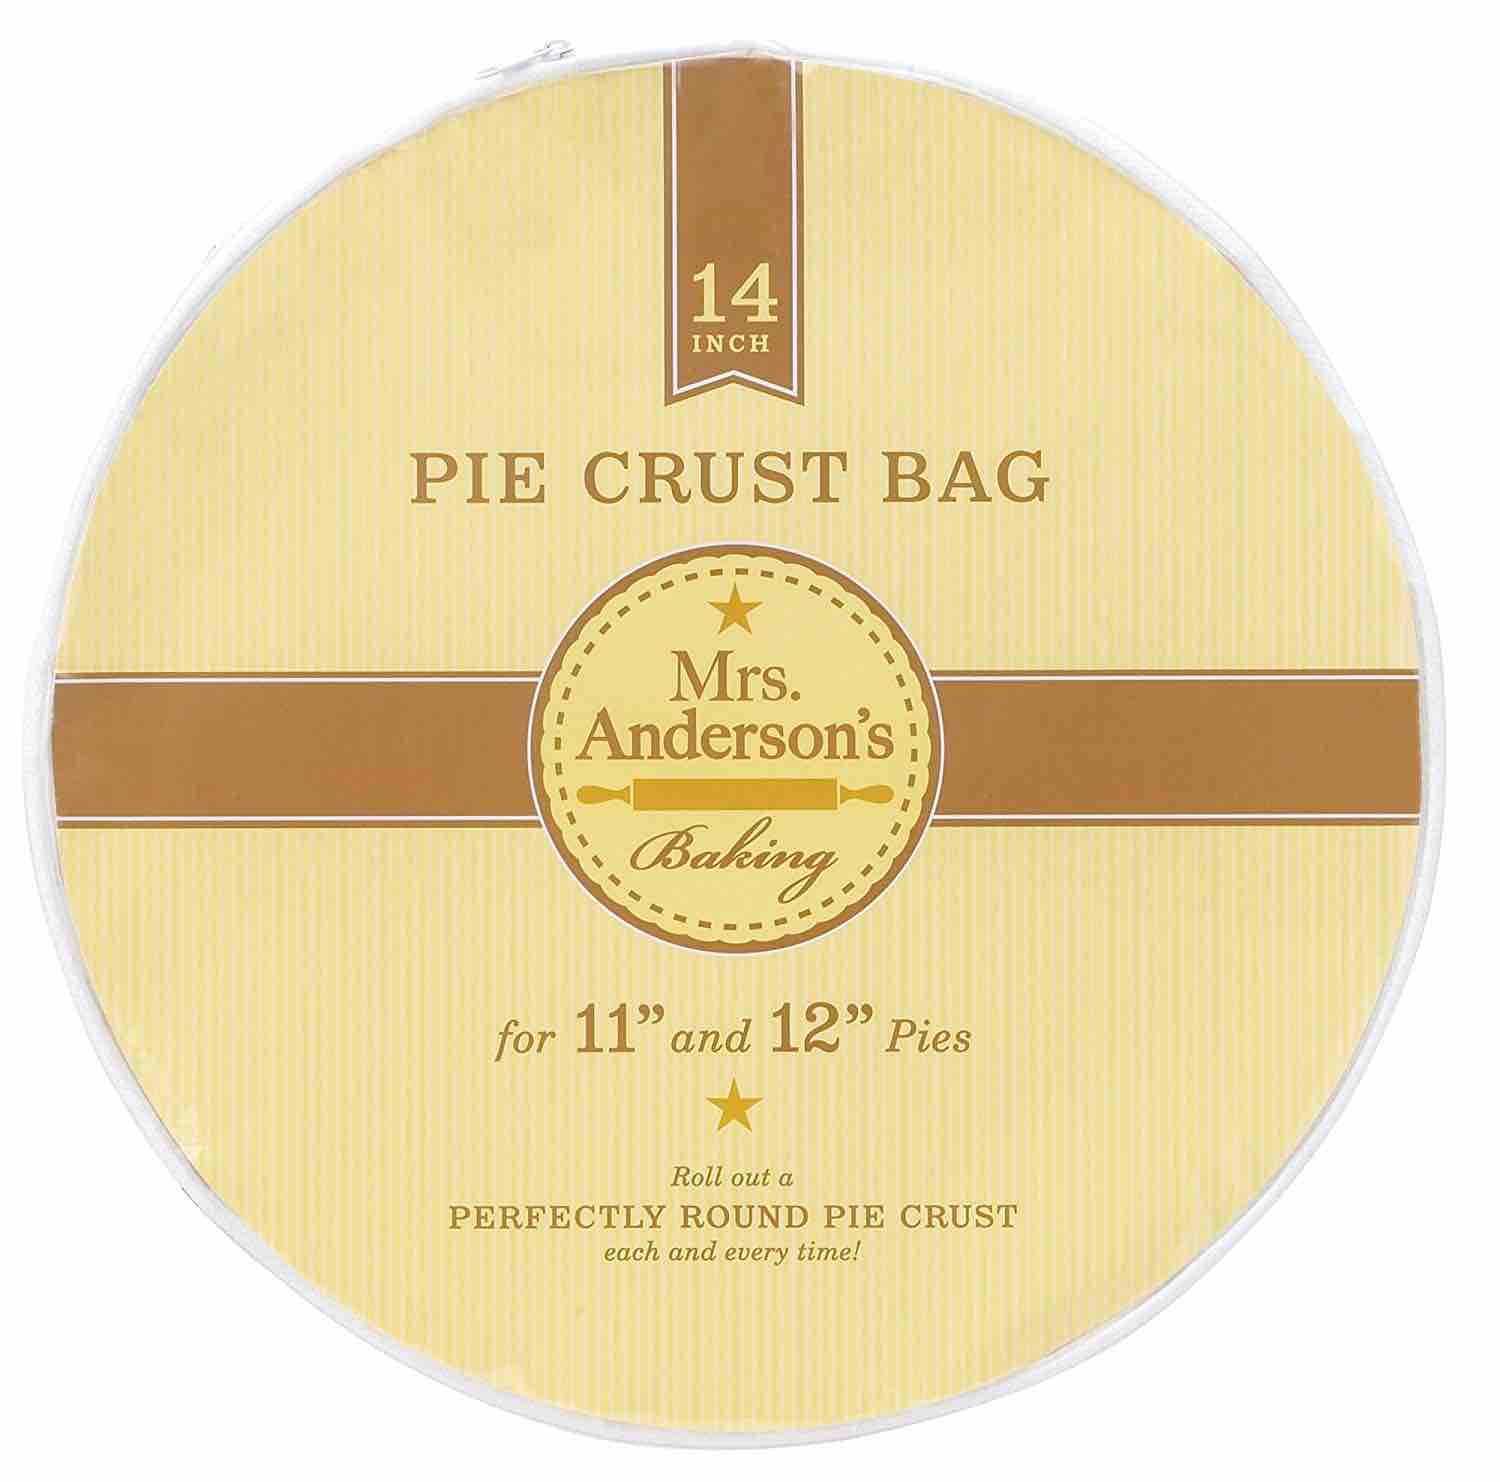 Mrs. Anderson's Easy No-Mess 14" Pie Crust Maker Bag